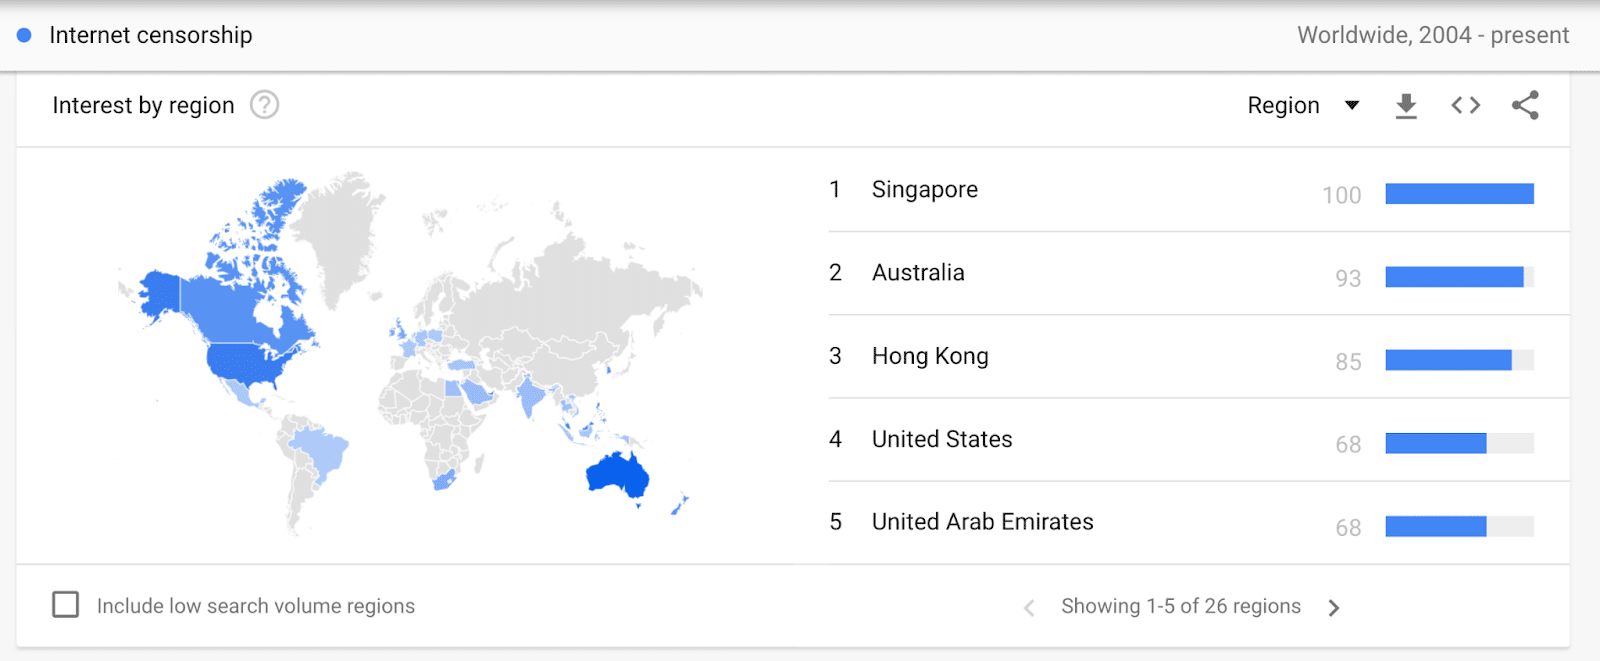 The countries with the highest level of interest in online censorshipSour